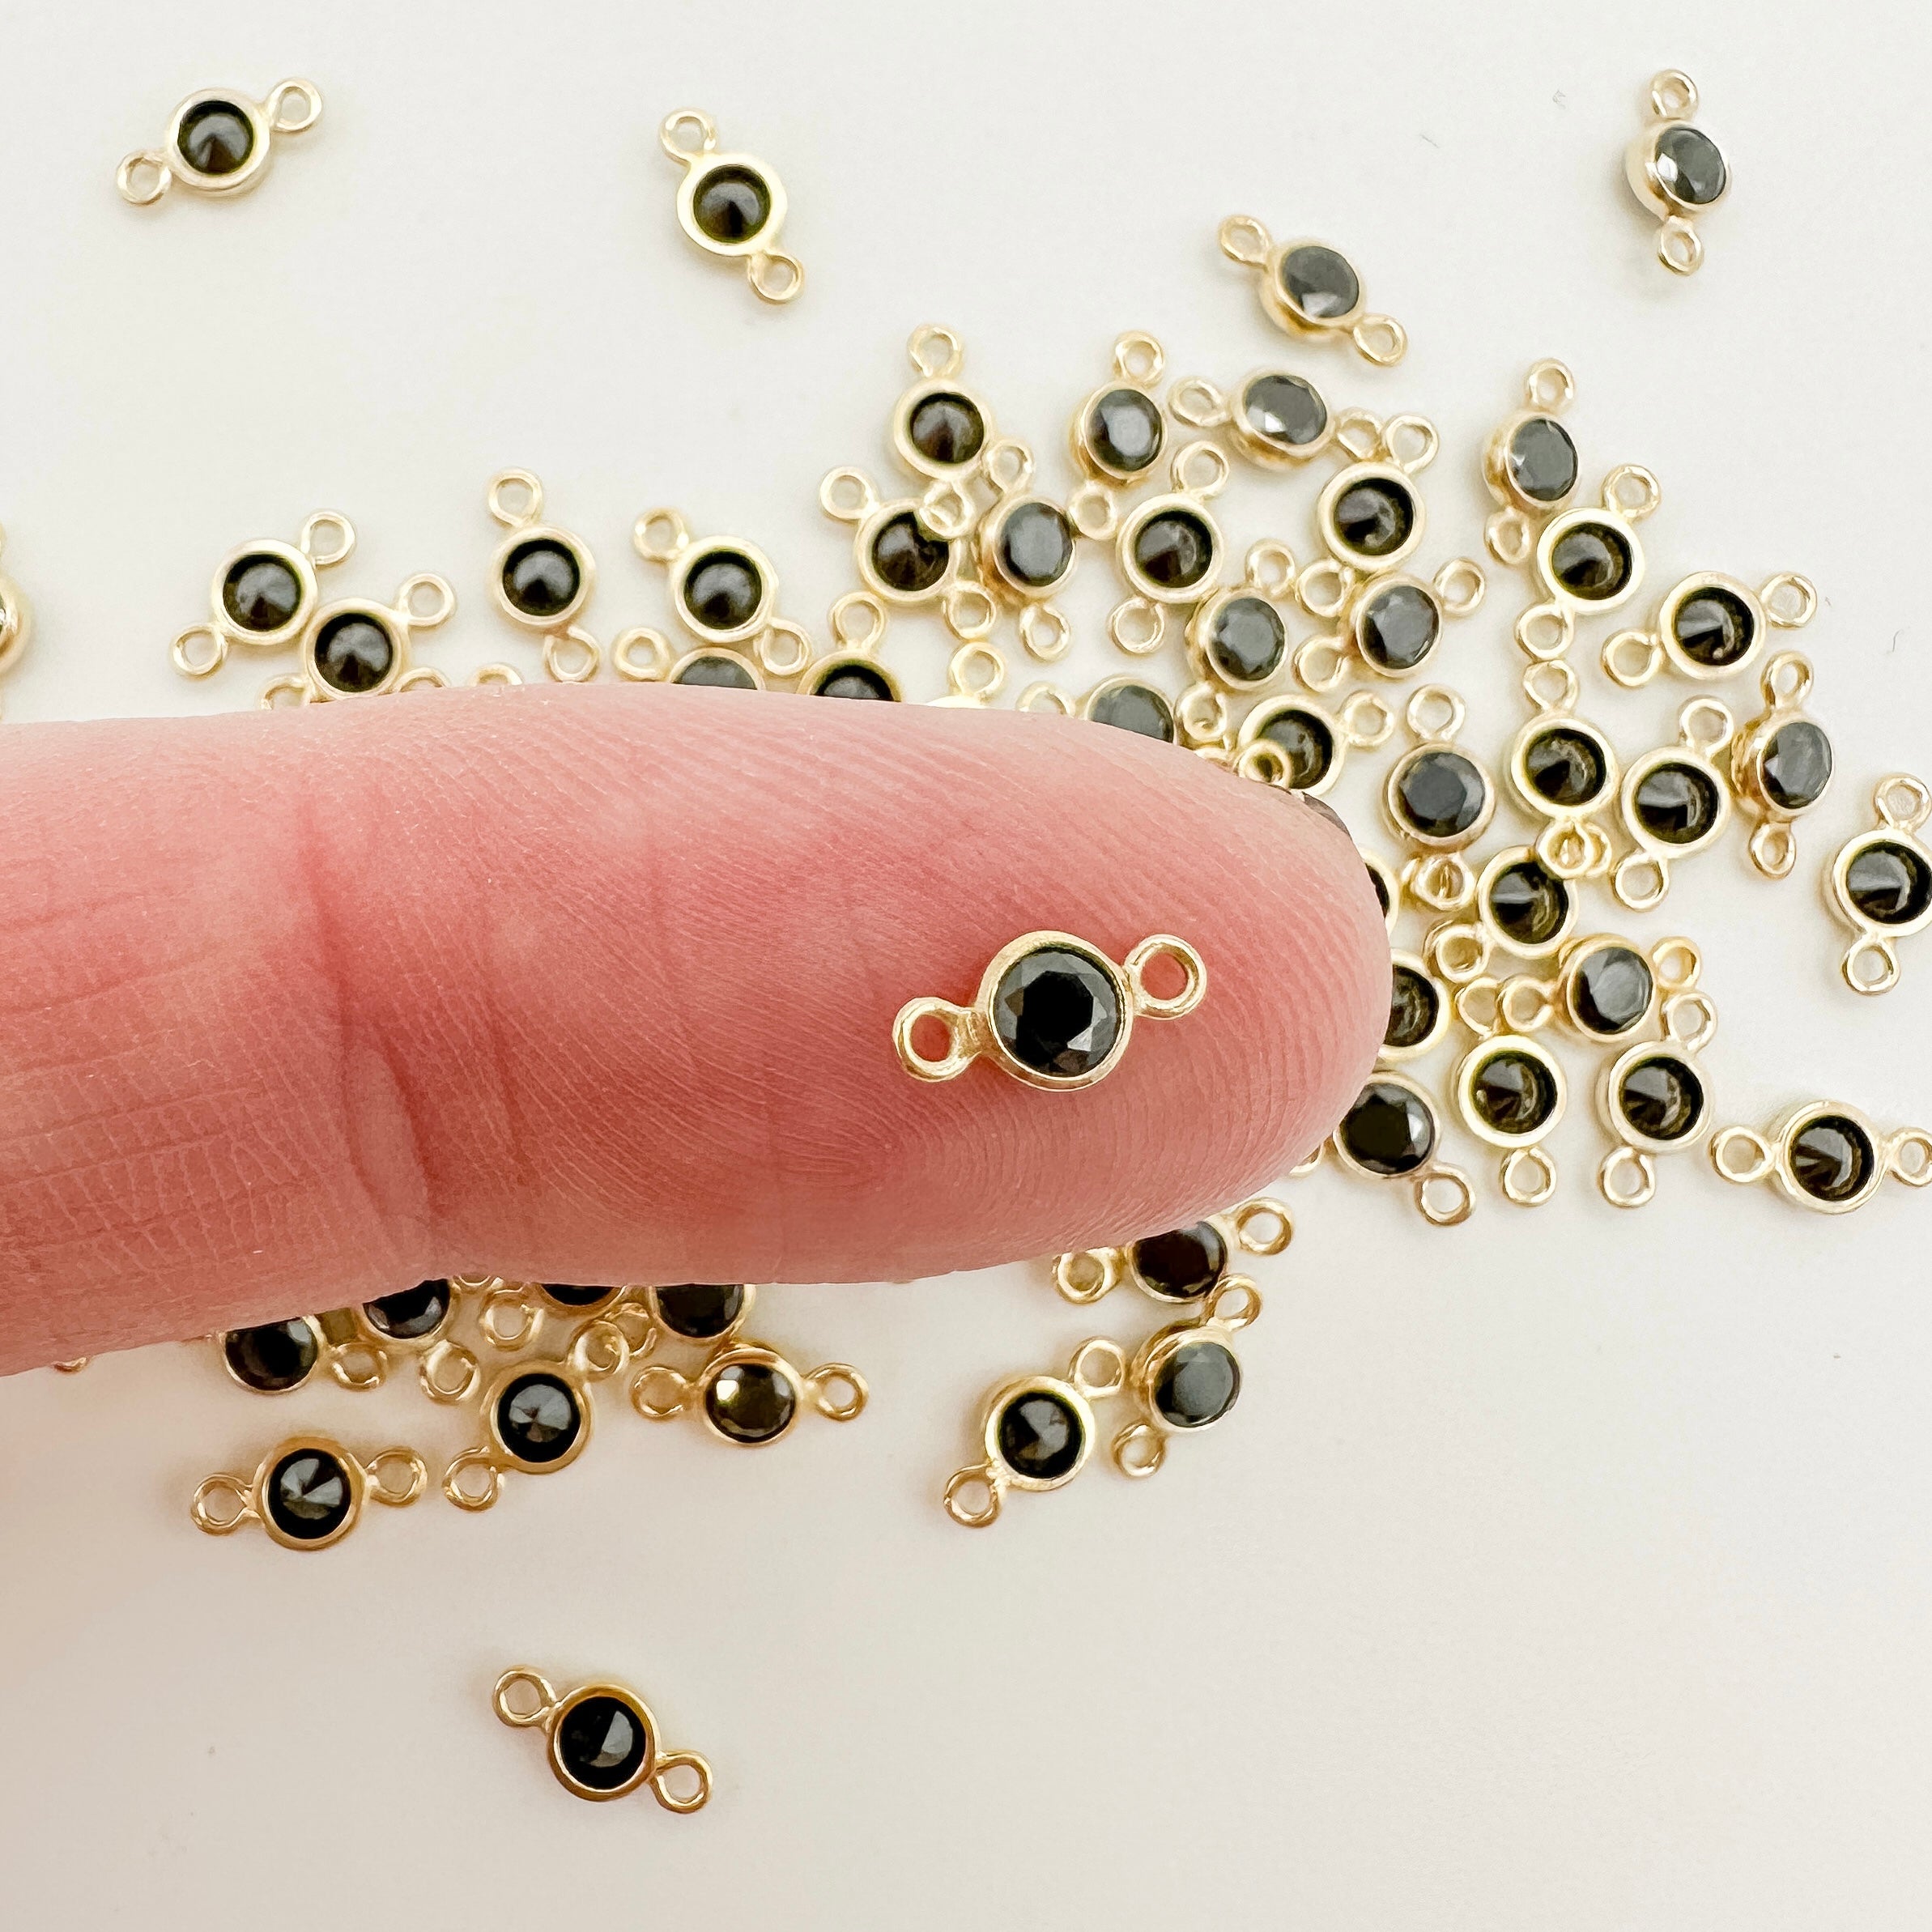 Wholesale 3 Ring Jewelry Connector